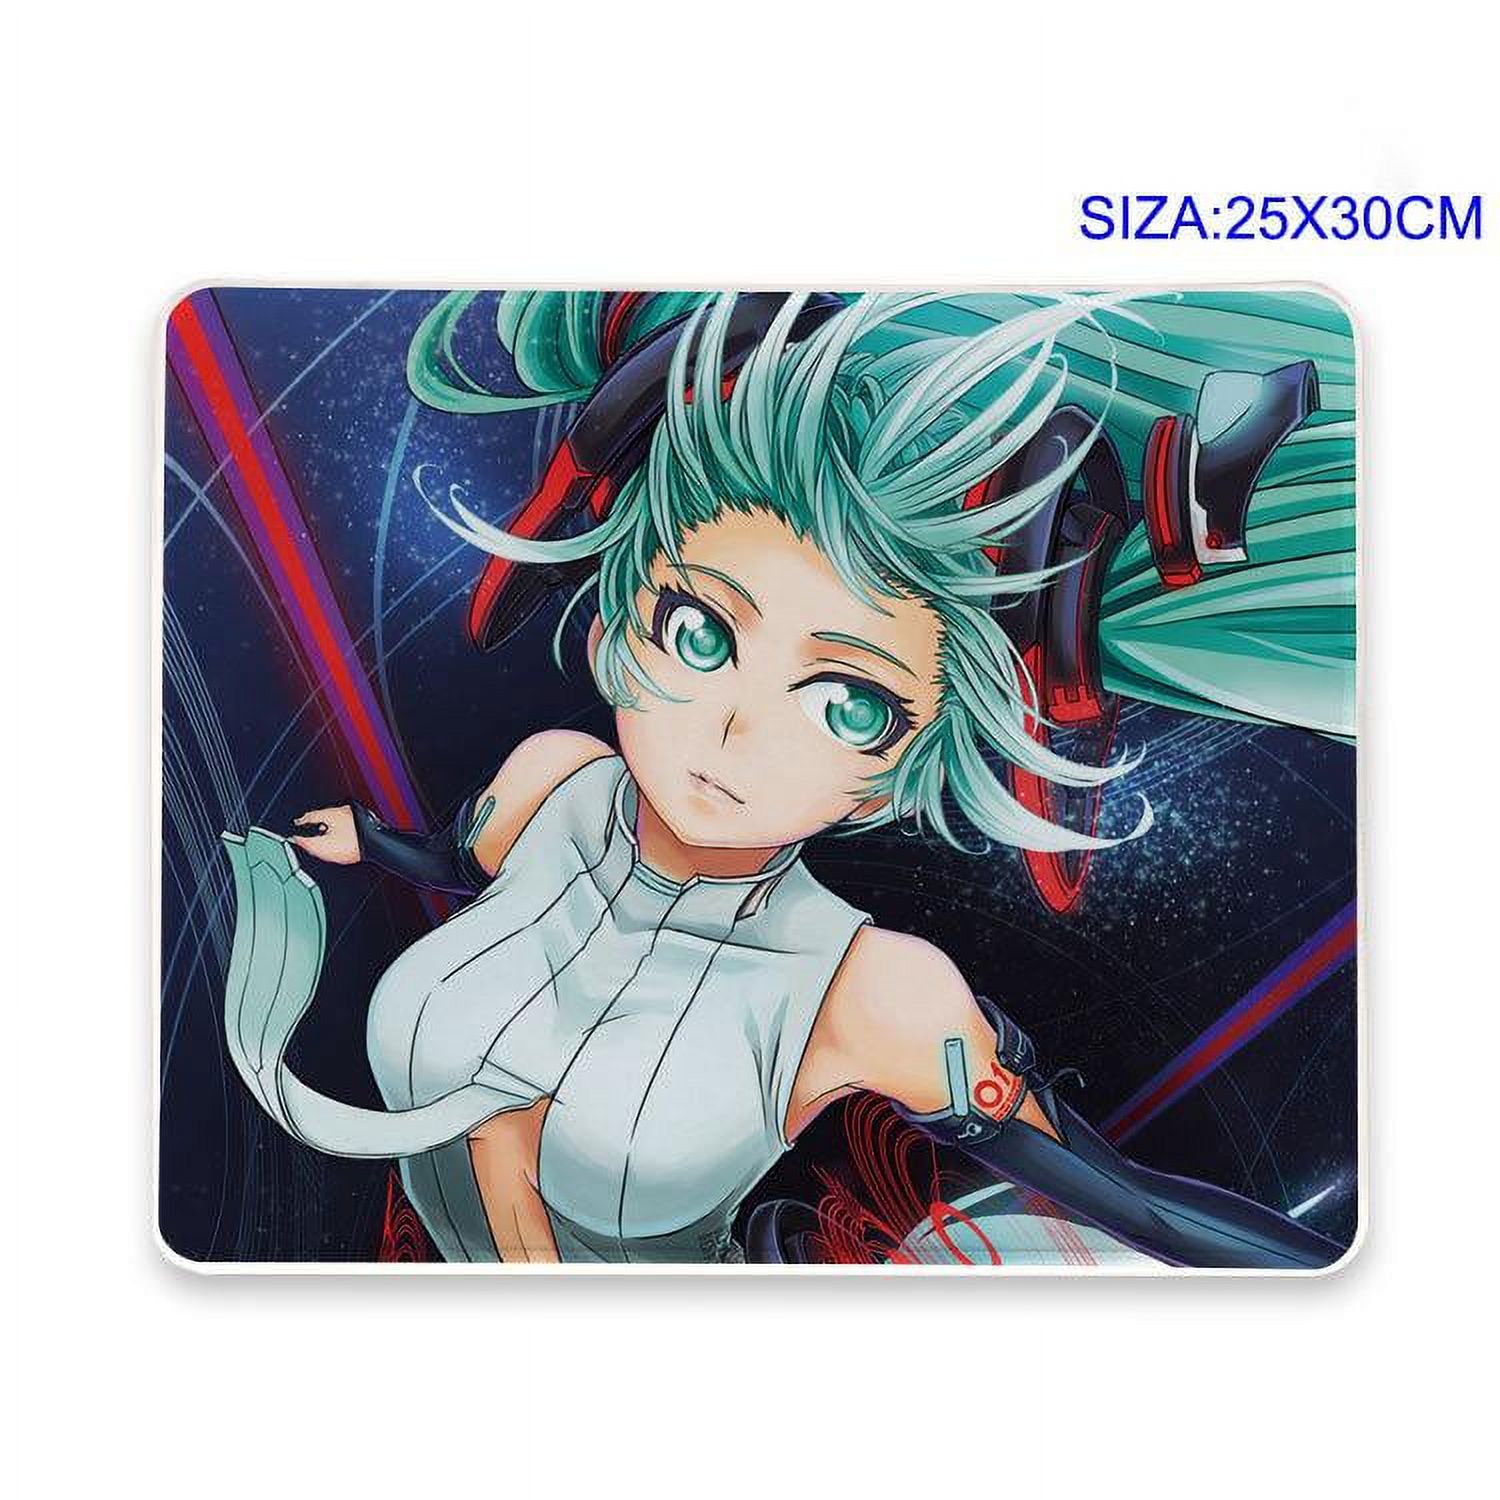 Non-Slip Mouse Pad for Home, Office, and Gaming Desk mousepad anti-slip mouse pad mat mice mousepad desktop mouse pad laptop mouse pad gaming mouse pad - image 2 of 7